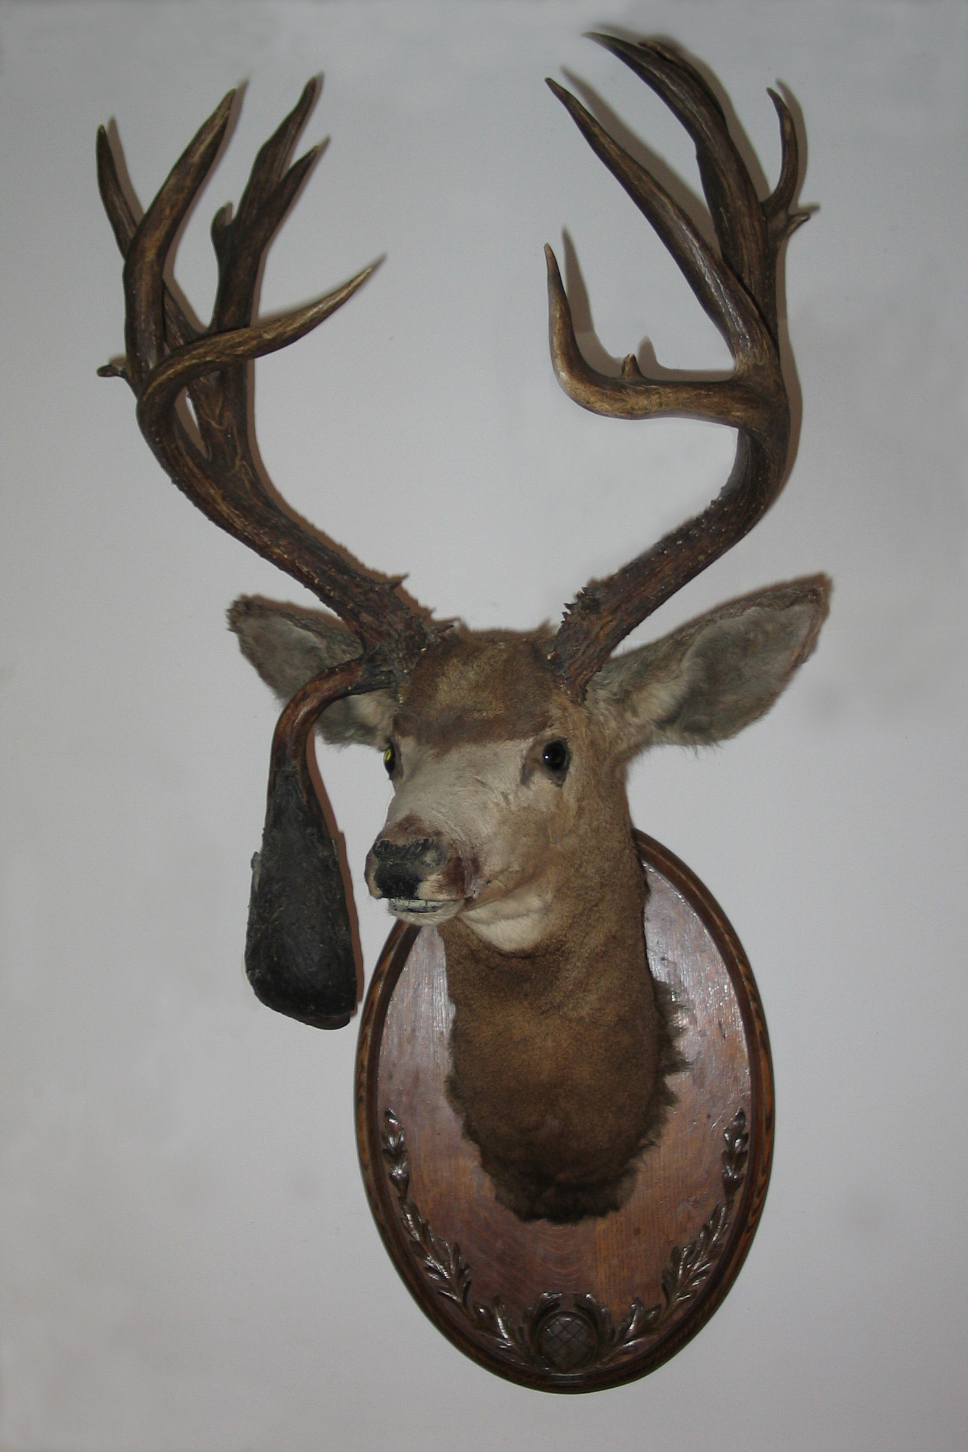 http://www.lakecountrymuseum.com/wp-content/uploads/2011/11/Deer-head-rotated_078_needs-PS1.jpg